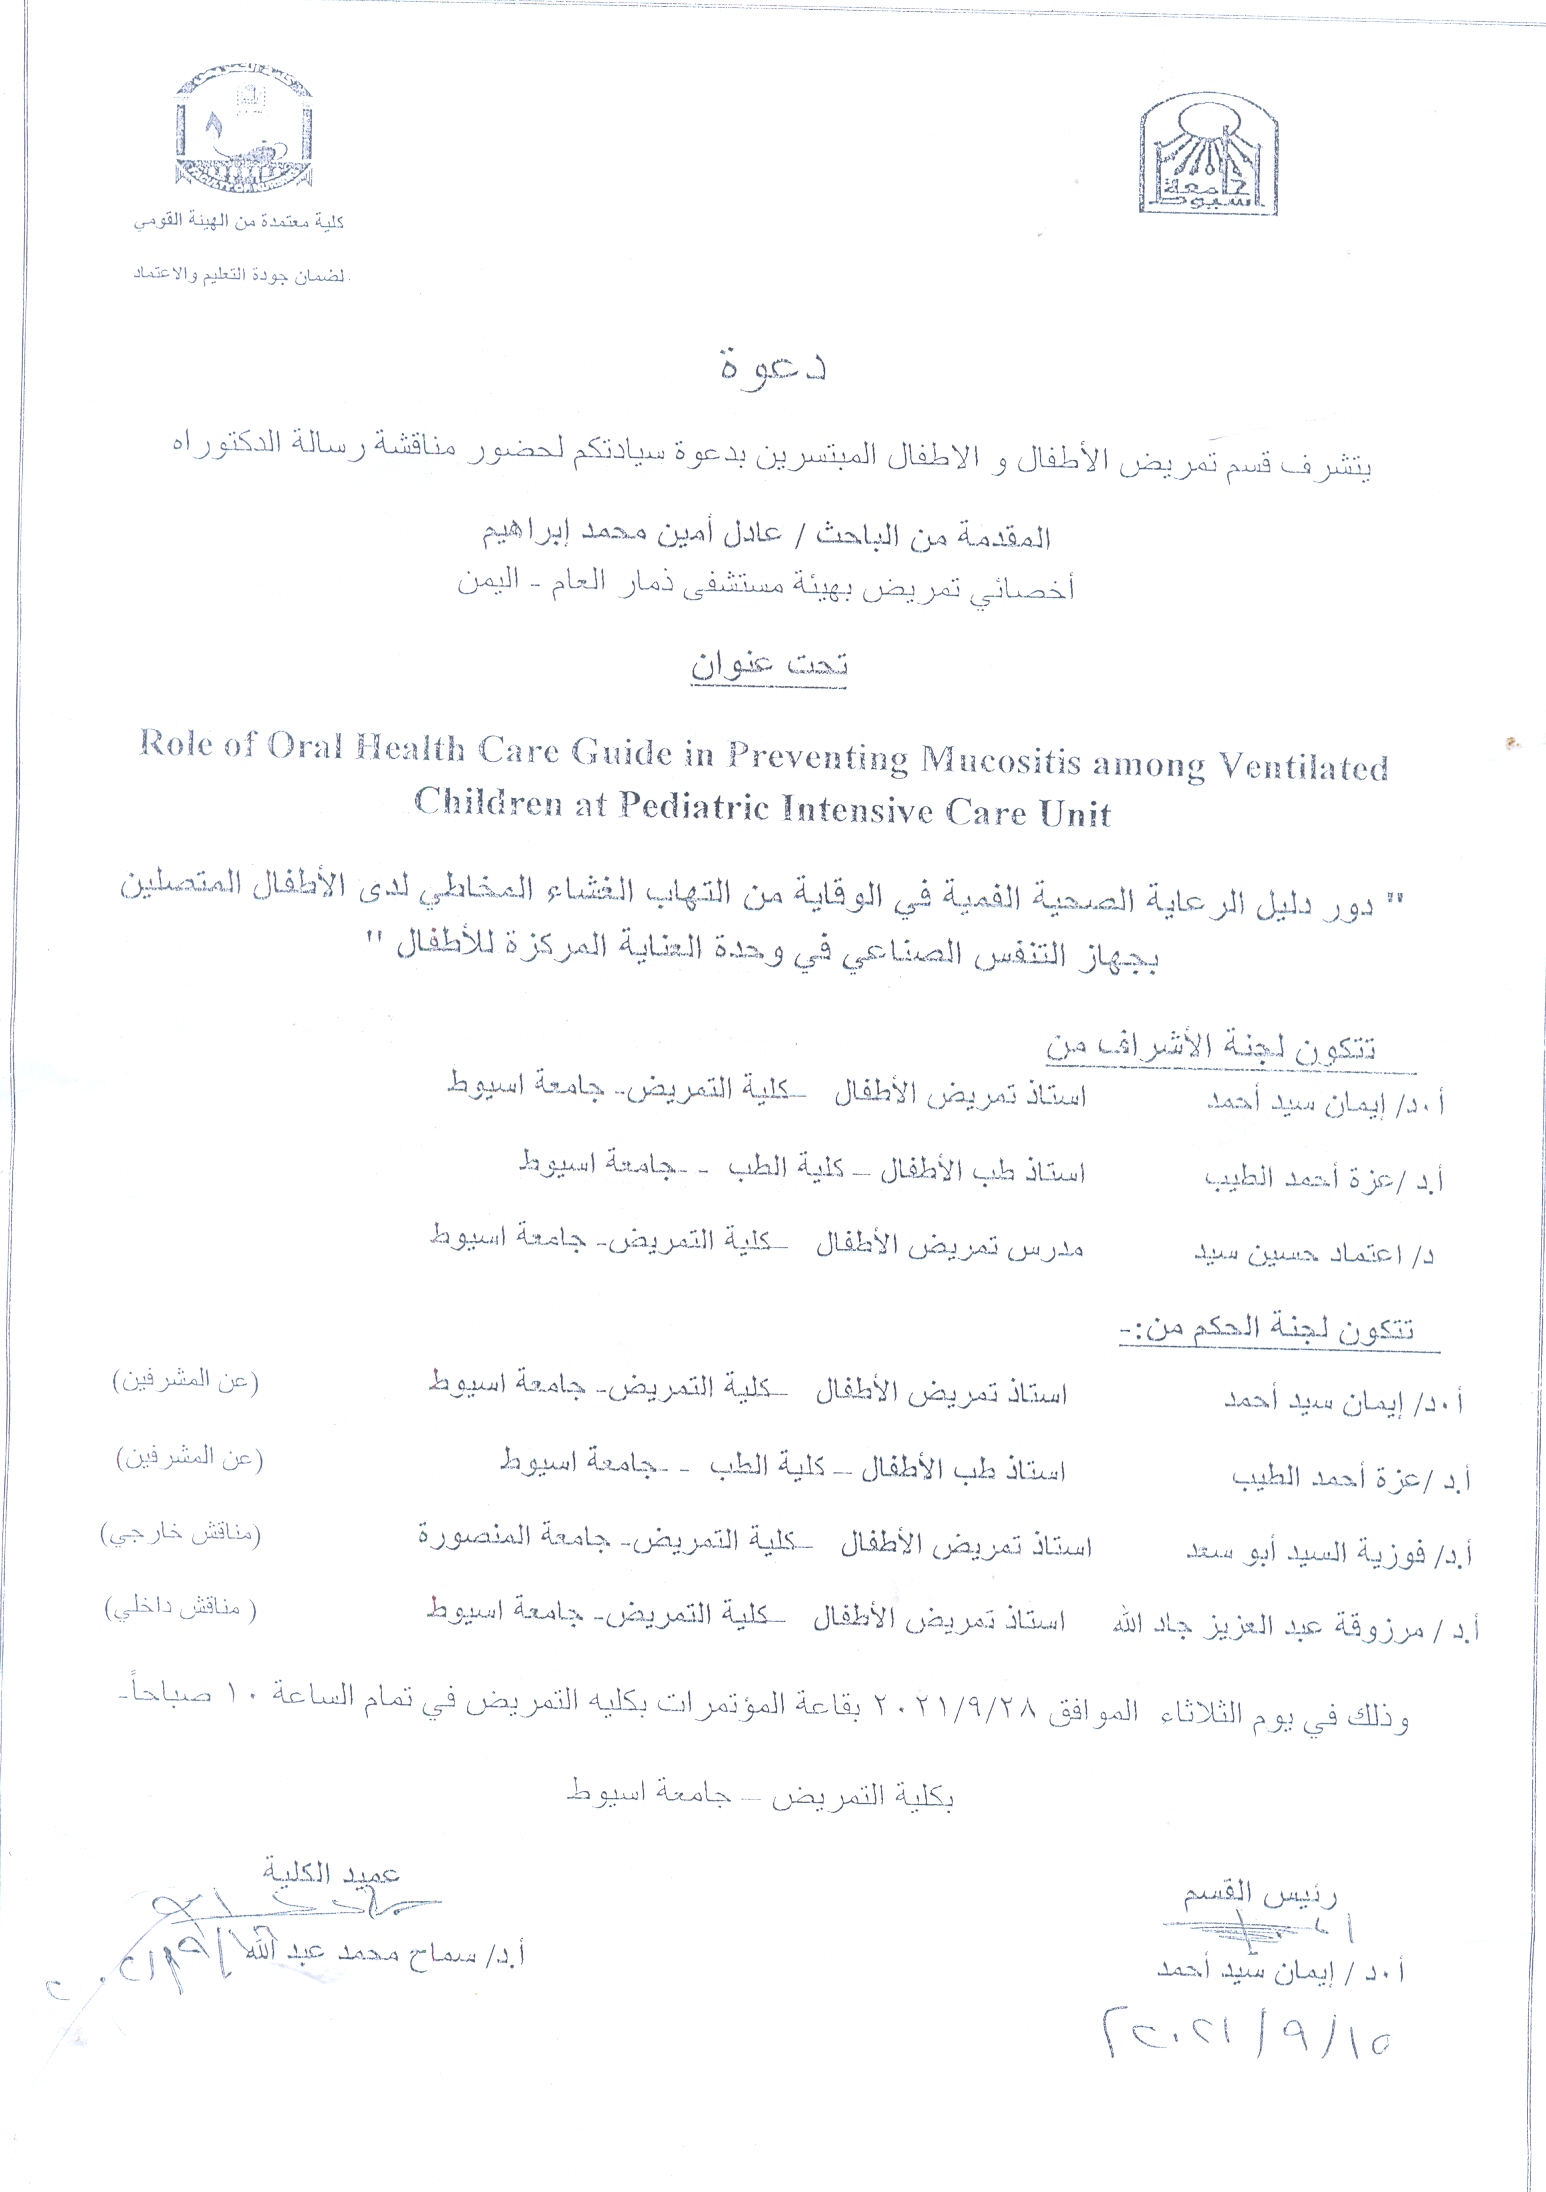 Discussion of doctoral thesis submitted by researcher/ Adel Amin Mohamed Ibrahim